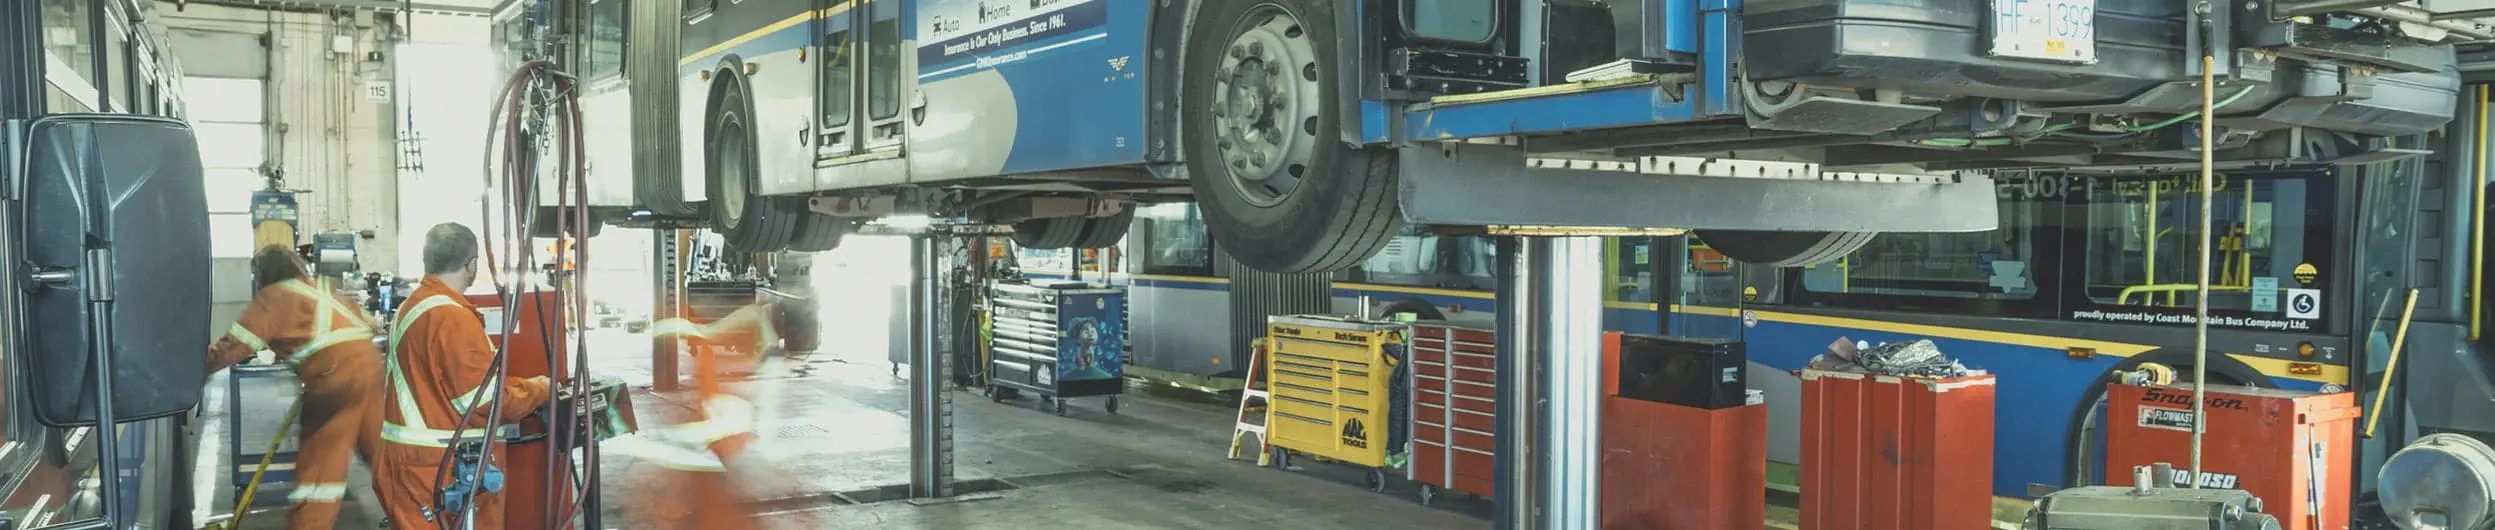 Mechanics at a depot working underneath an elevated bus